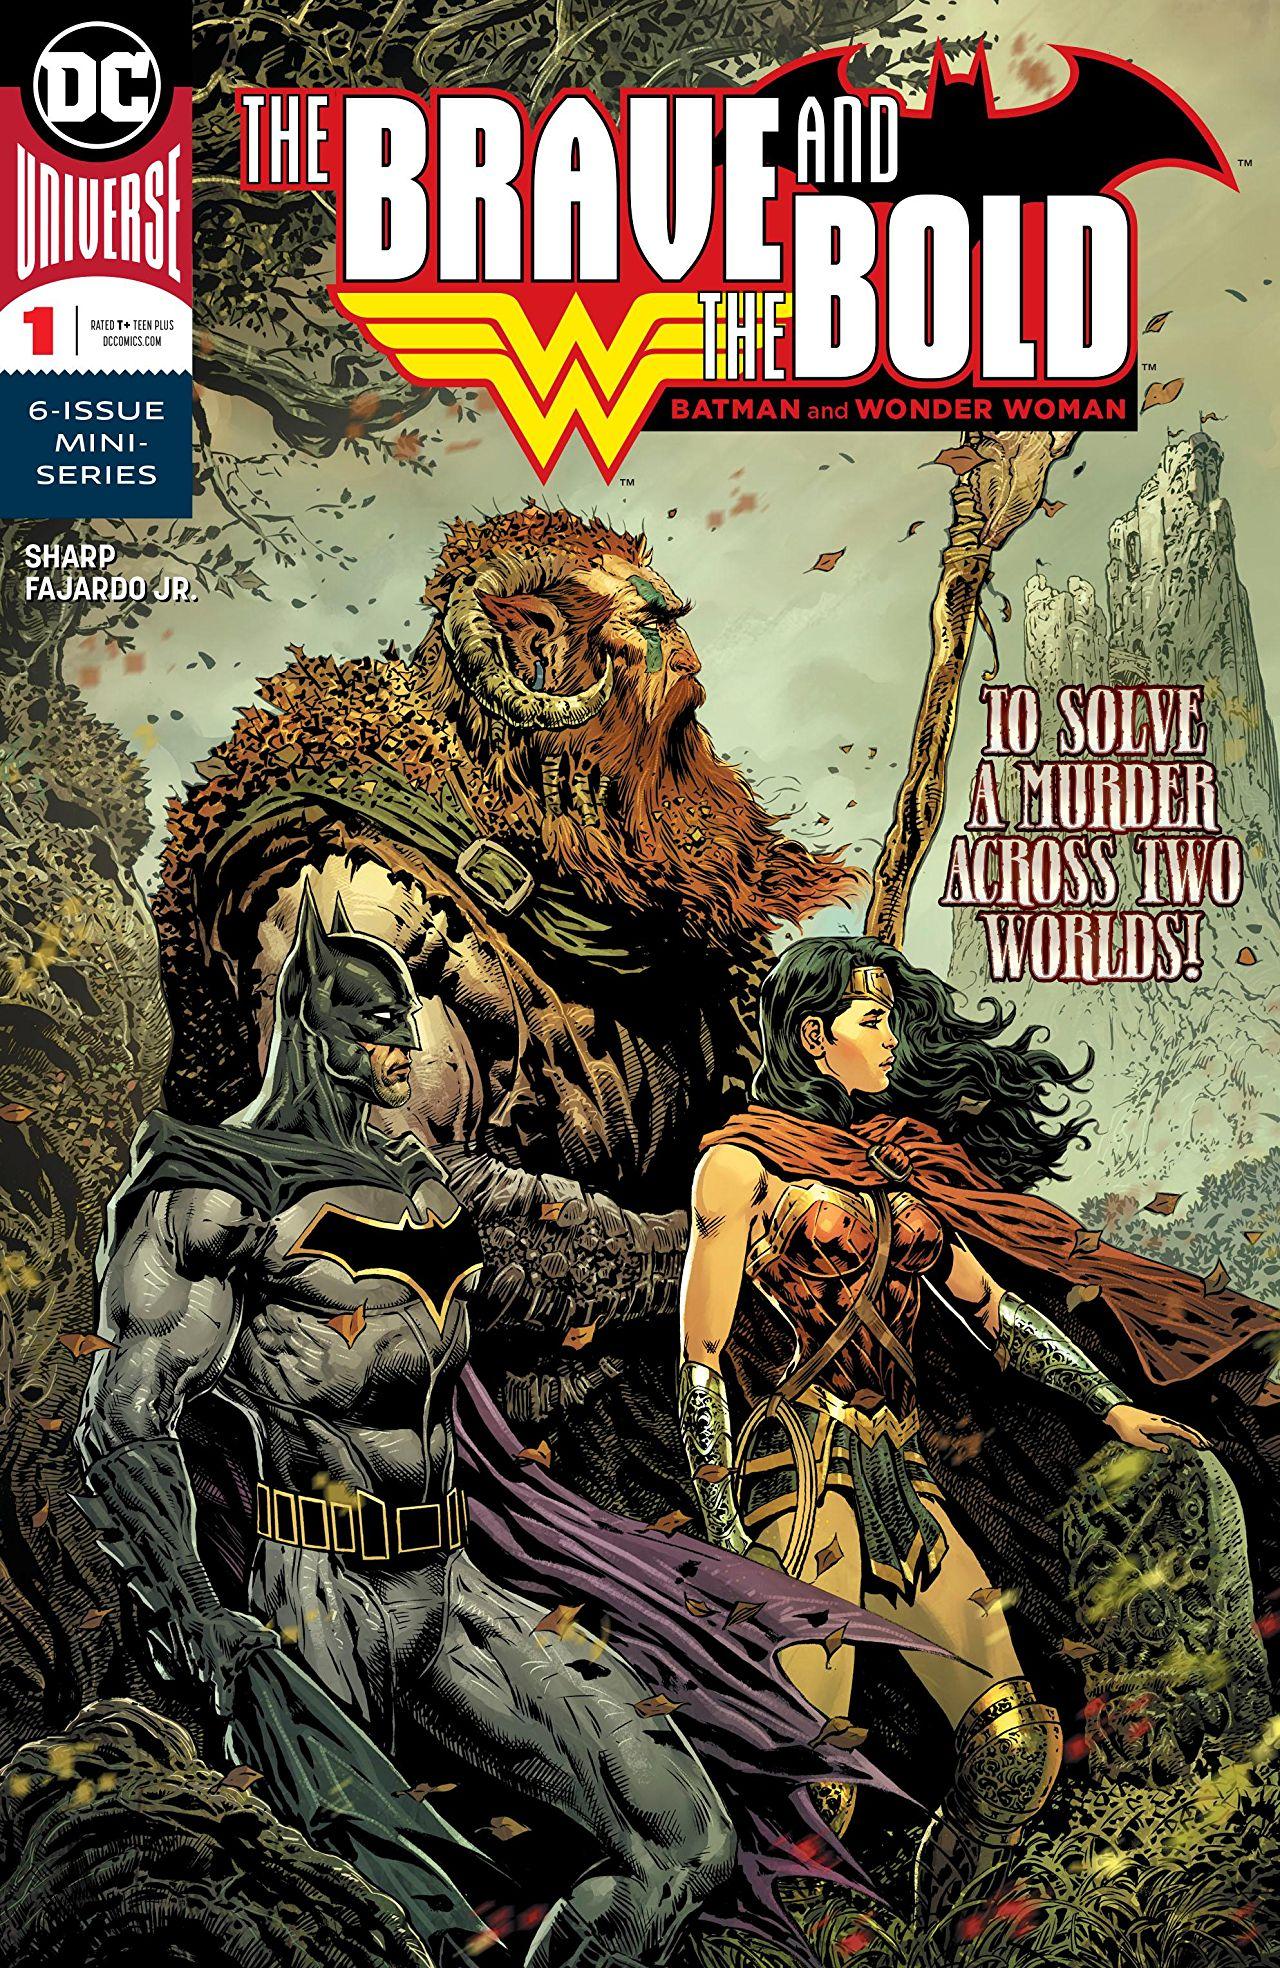 The Brave and the Bold: Batman and Wonder Woman Vol. 1 #1